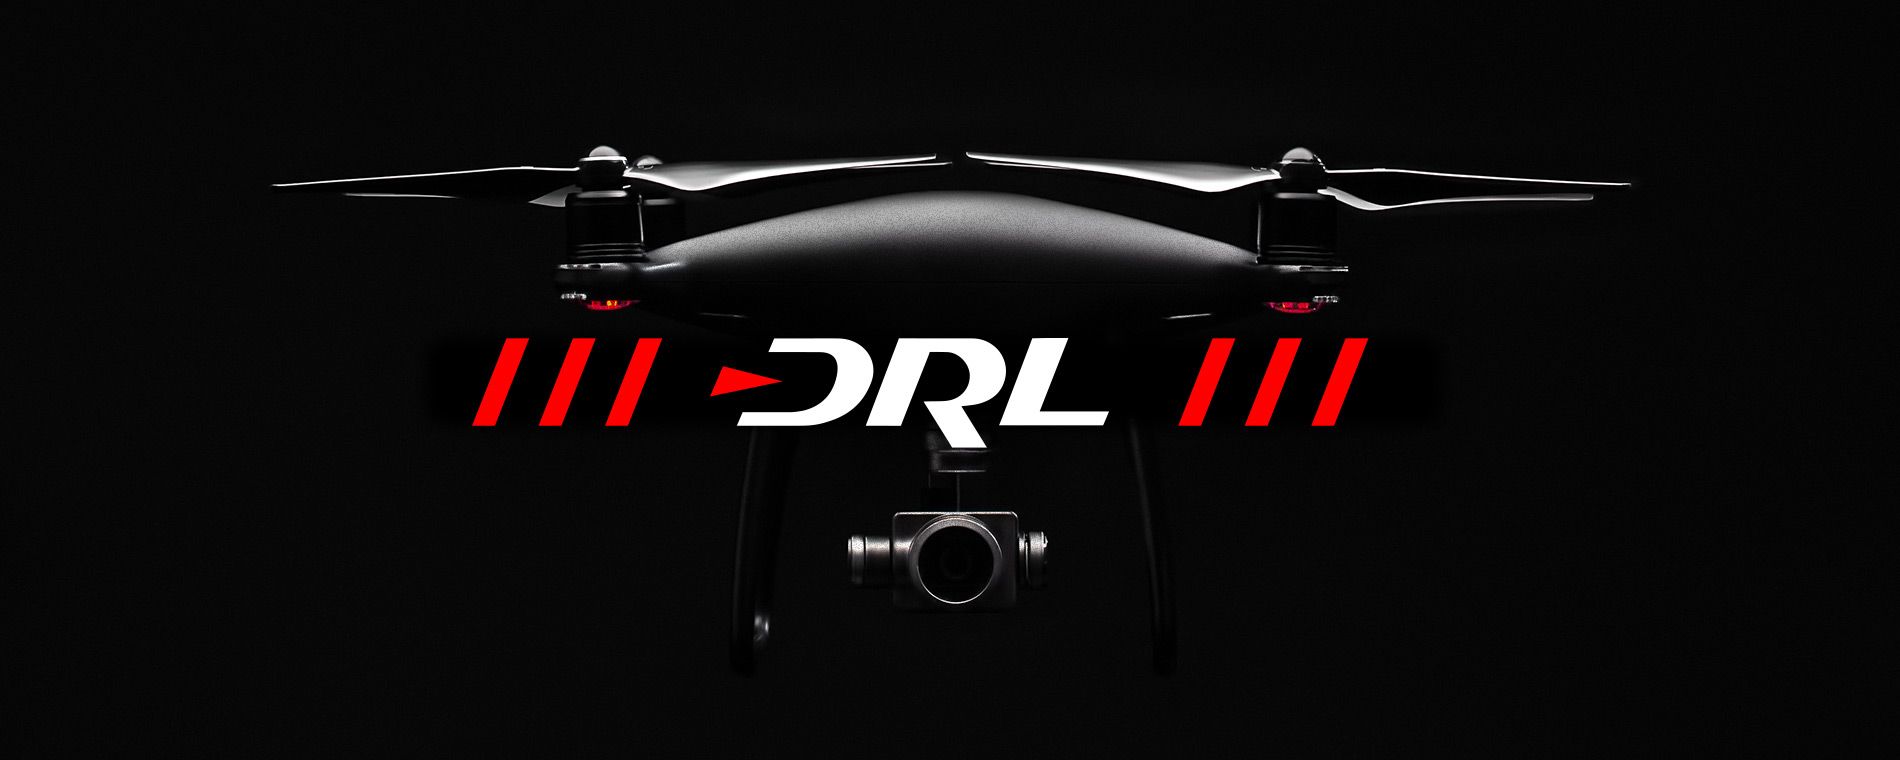 Drone Racing League enters the metaverse